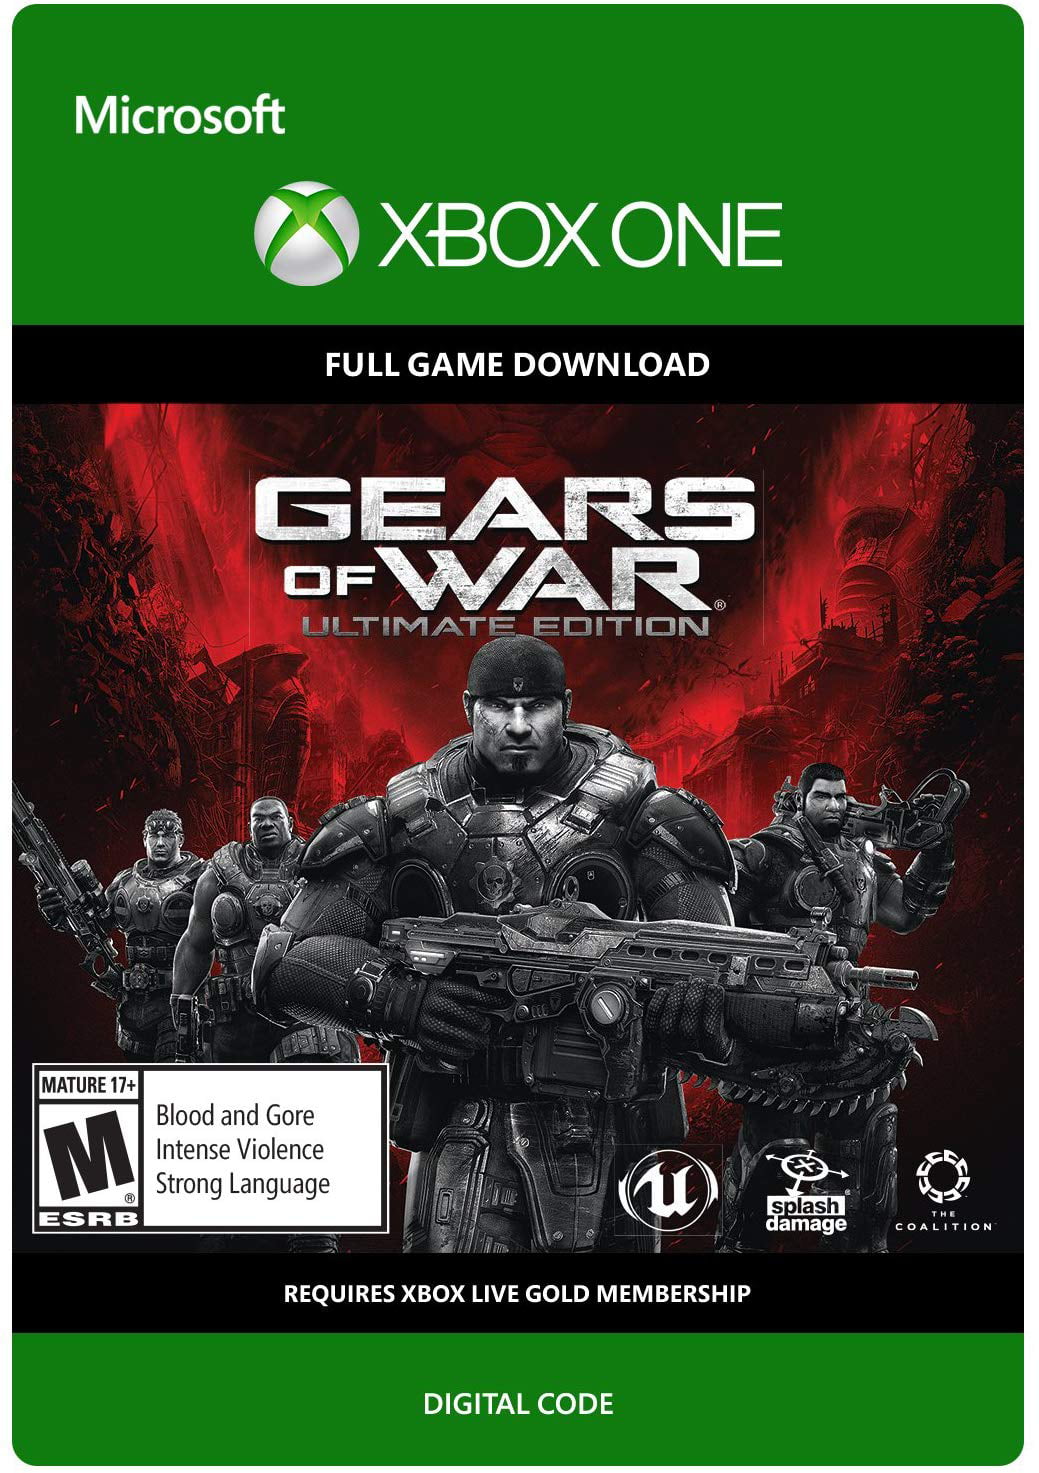 how to download gears of war 4 if you already bought it